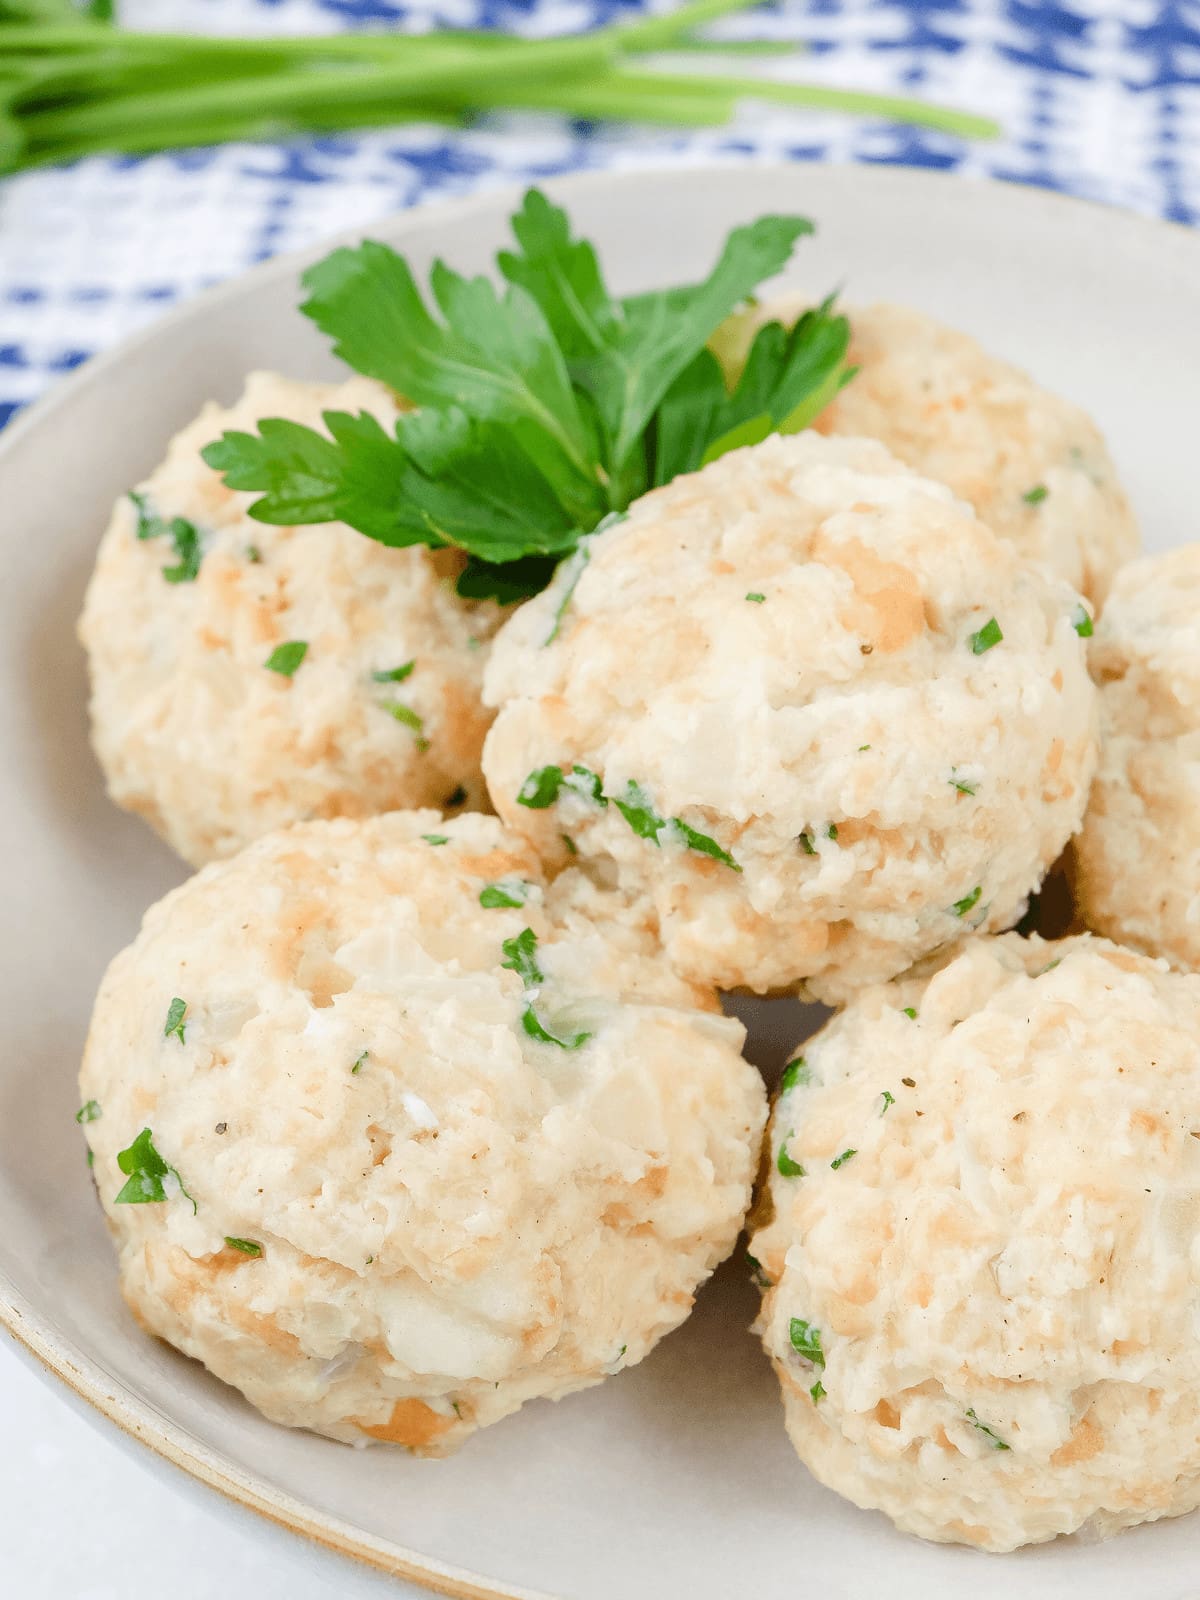 Cooked bread dumplings in bowl with parsley for decoration